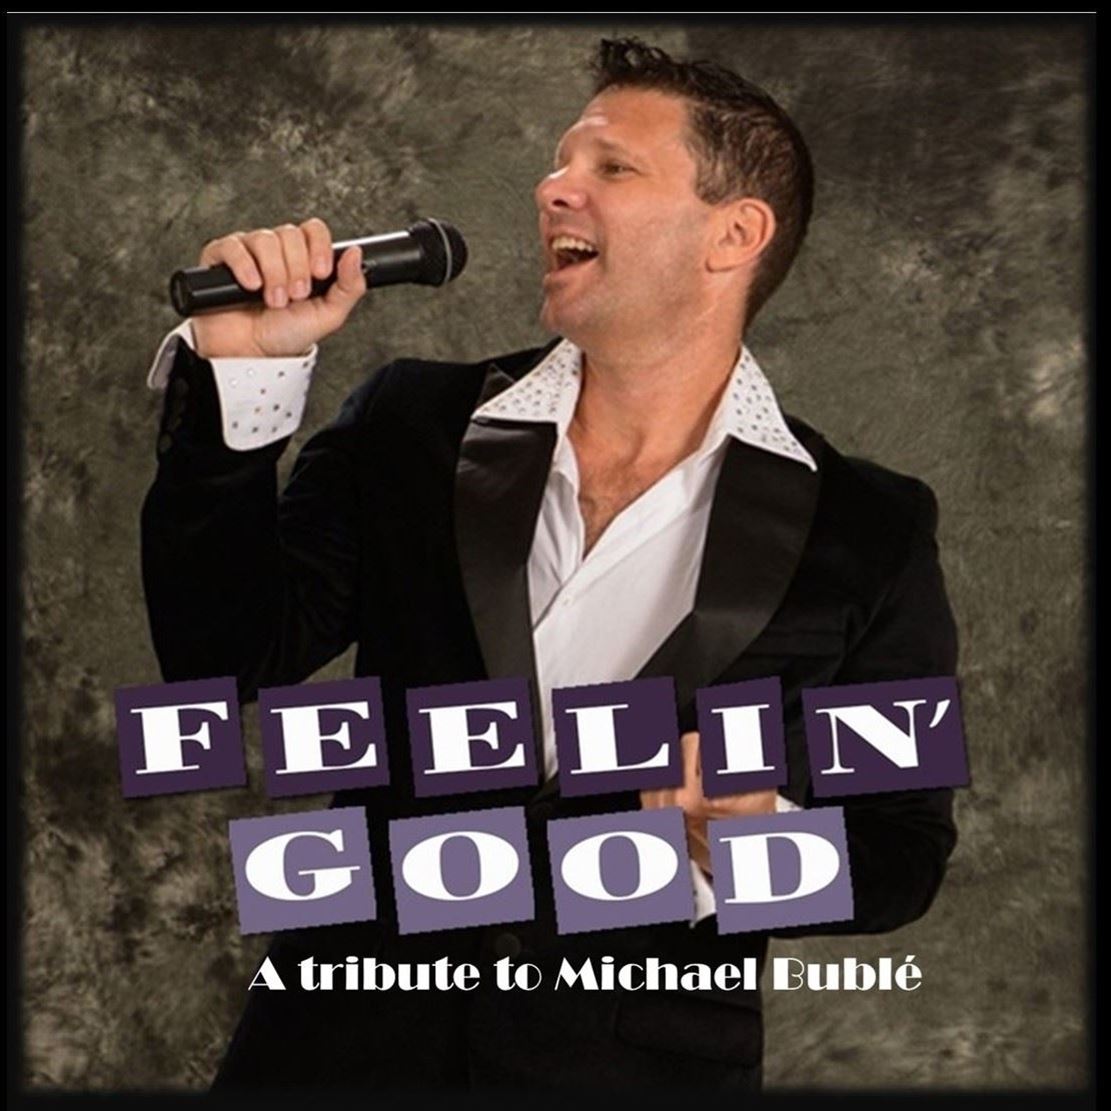 Feelin’ Good  - a Tribute to Michael Bublé